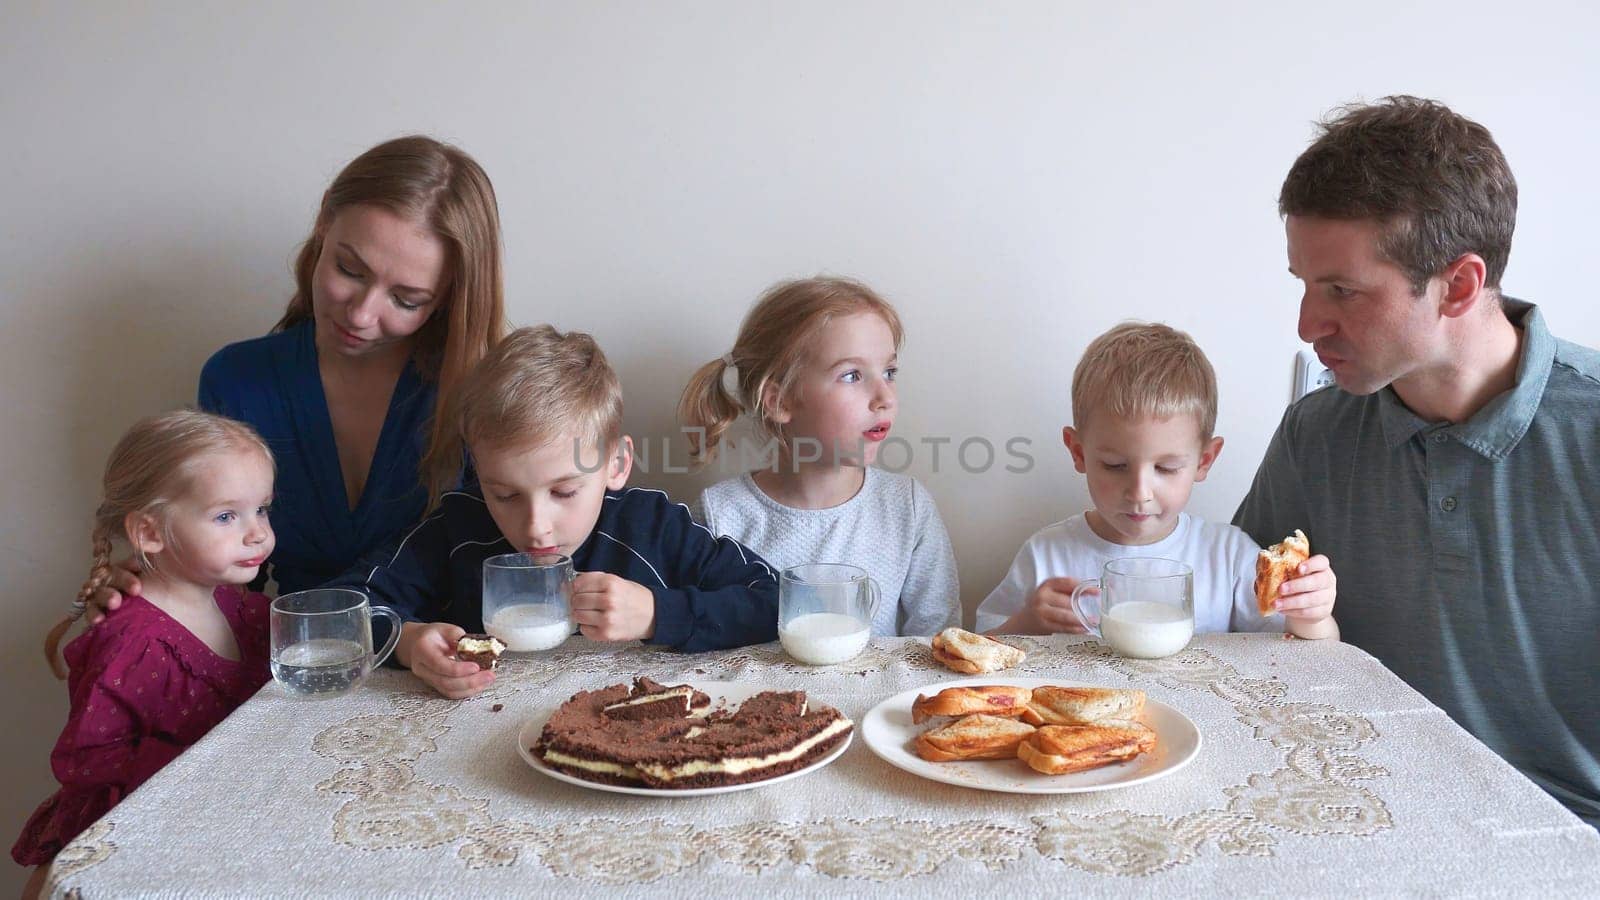 A large and friendly family has lunch at home